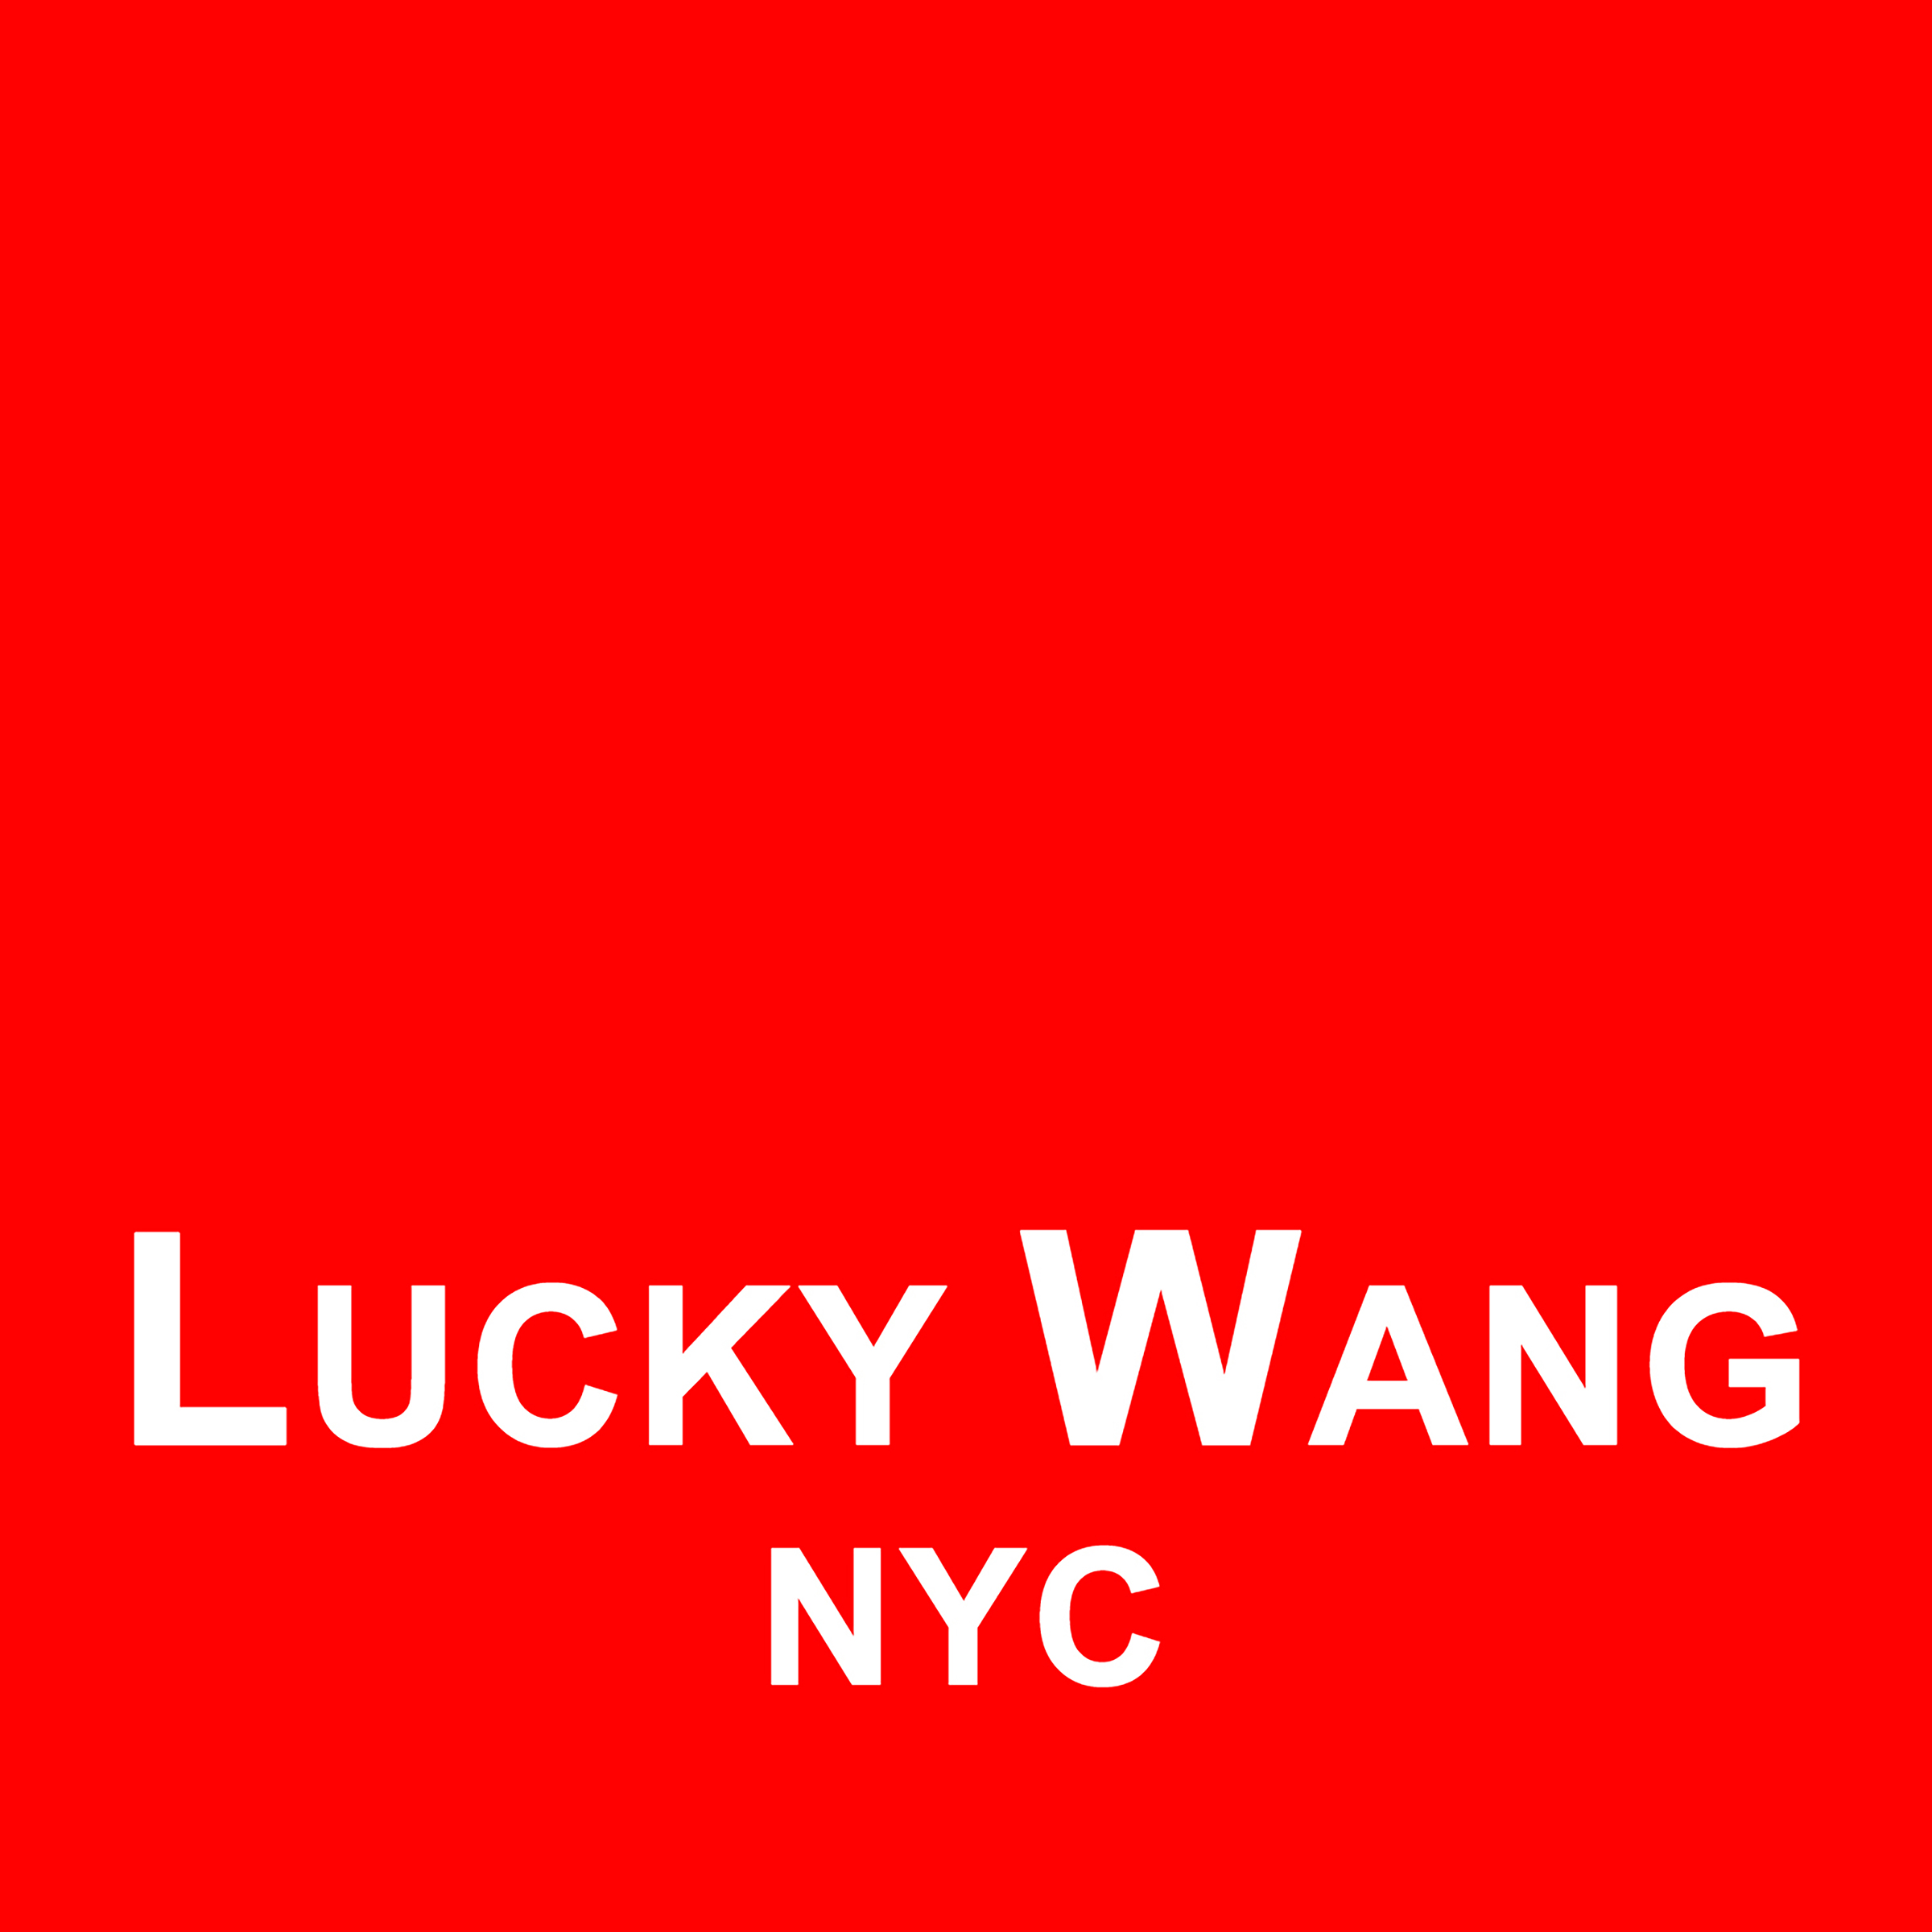 Taxi Rattle - Lucky Wang nyc